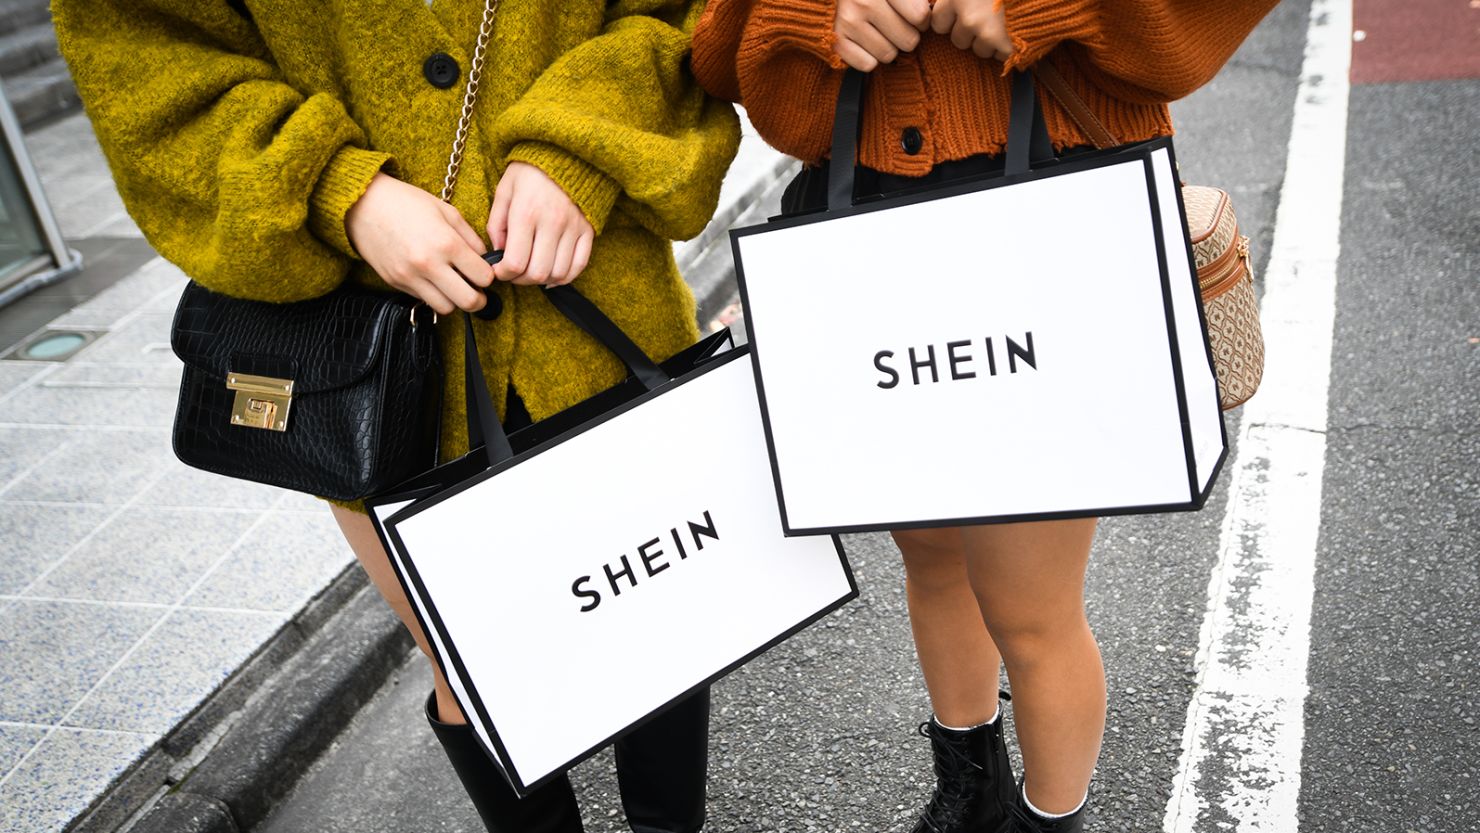 Shein Eyes London IPO Amidst Controversy and Regulatory Hurdles